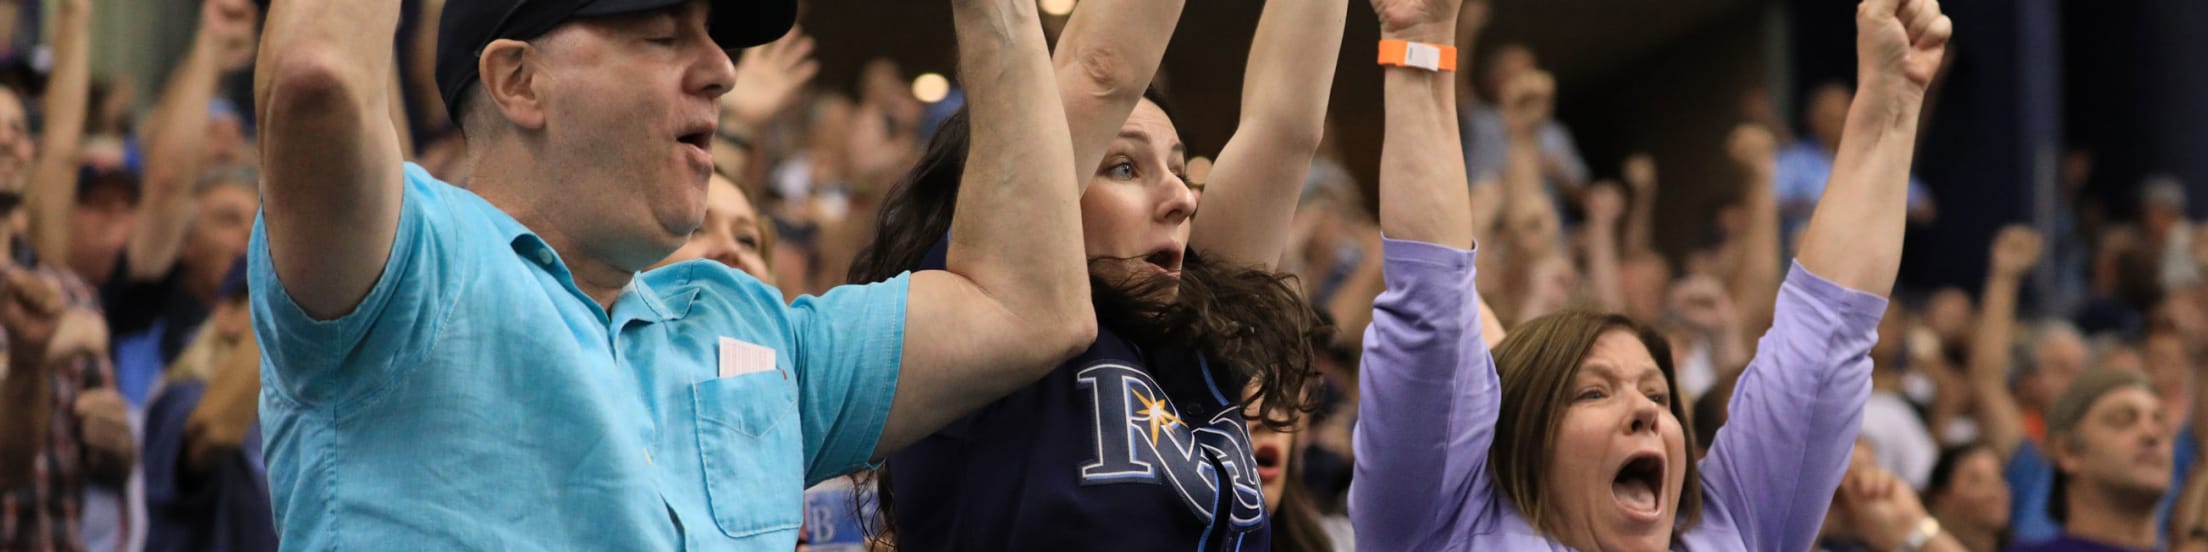 Rays to offer $10 tickets to all home games